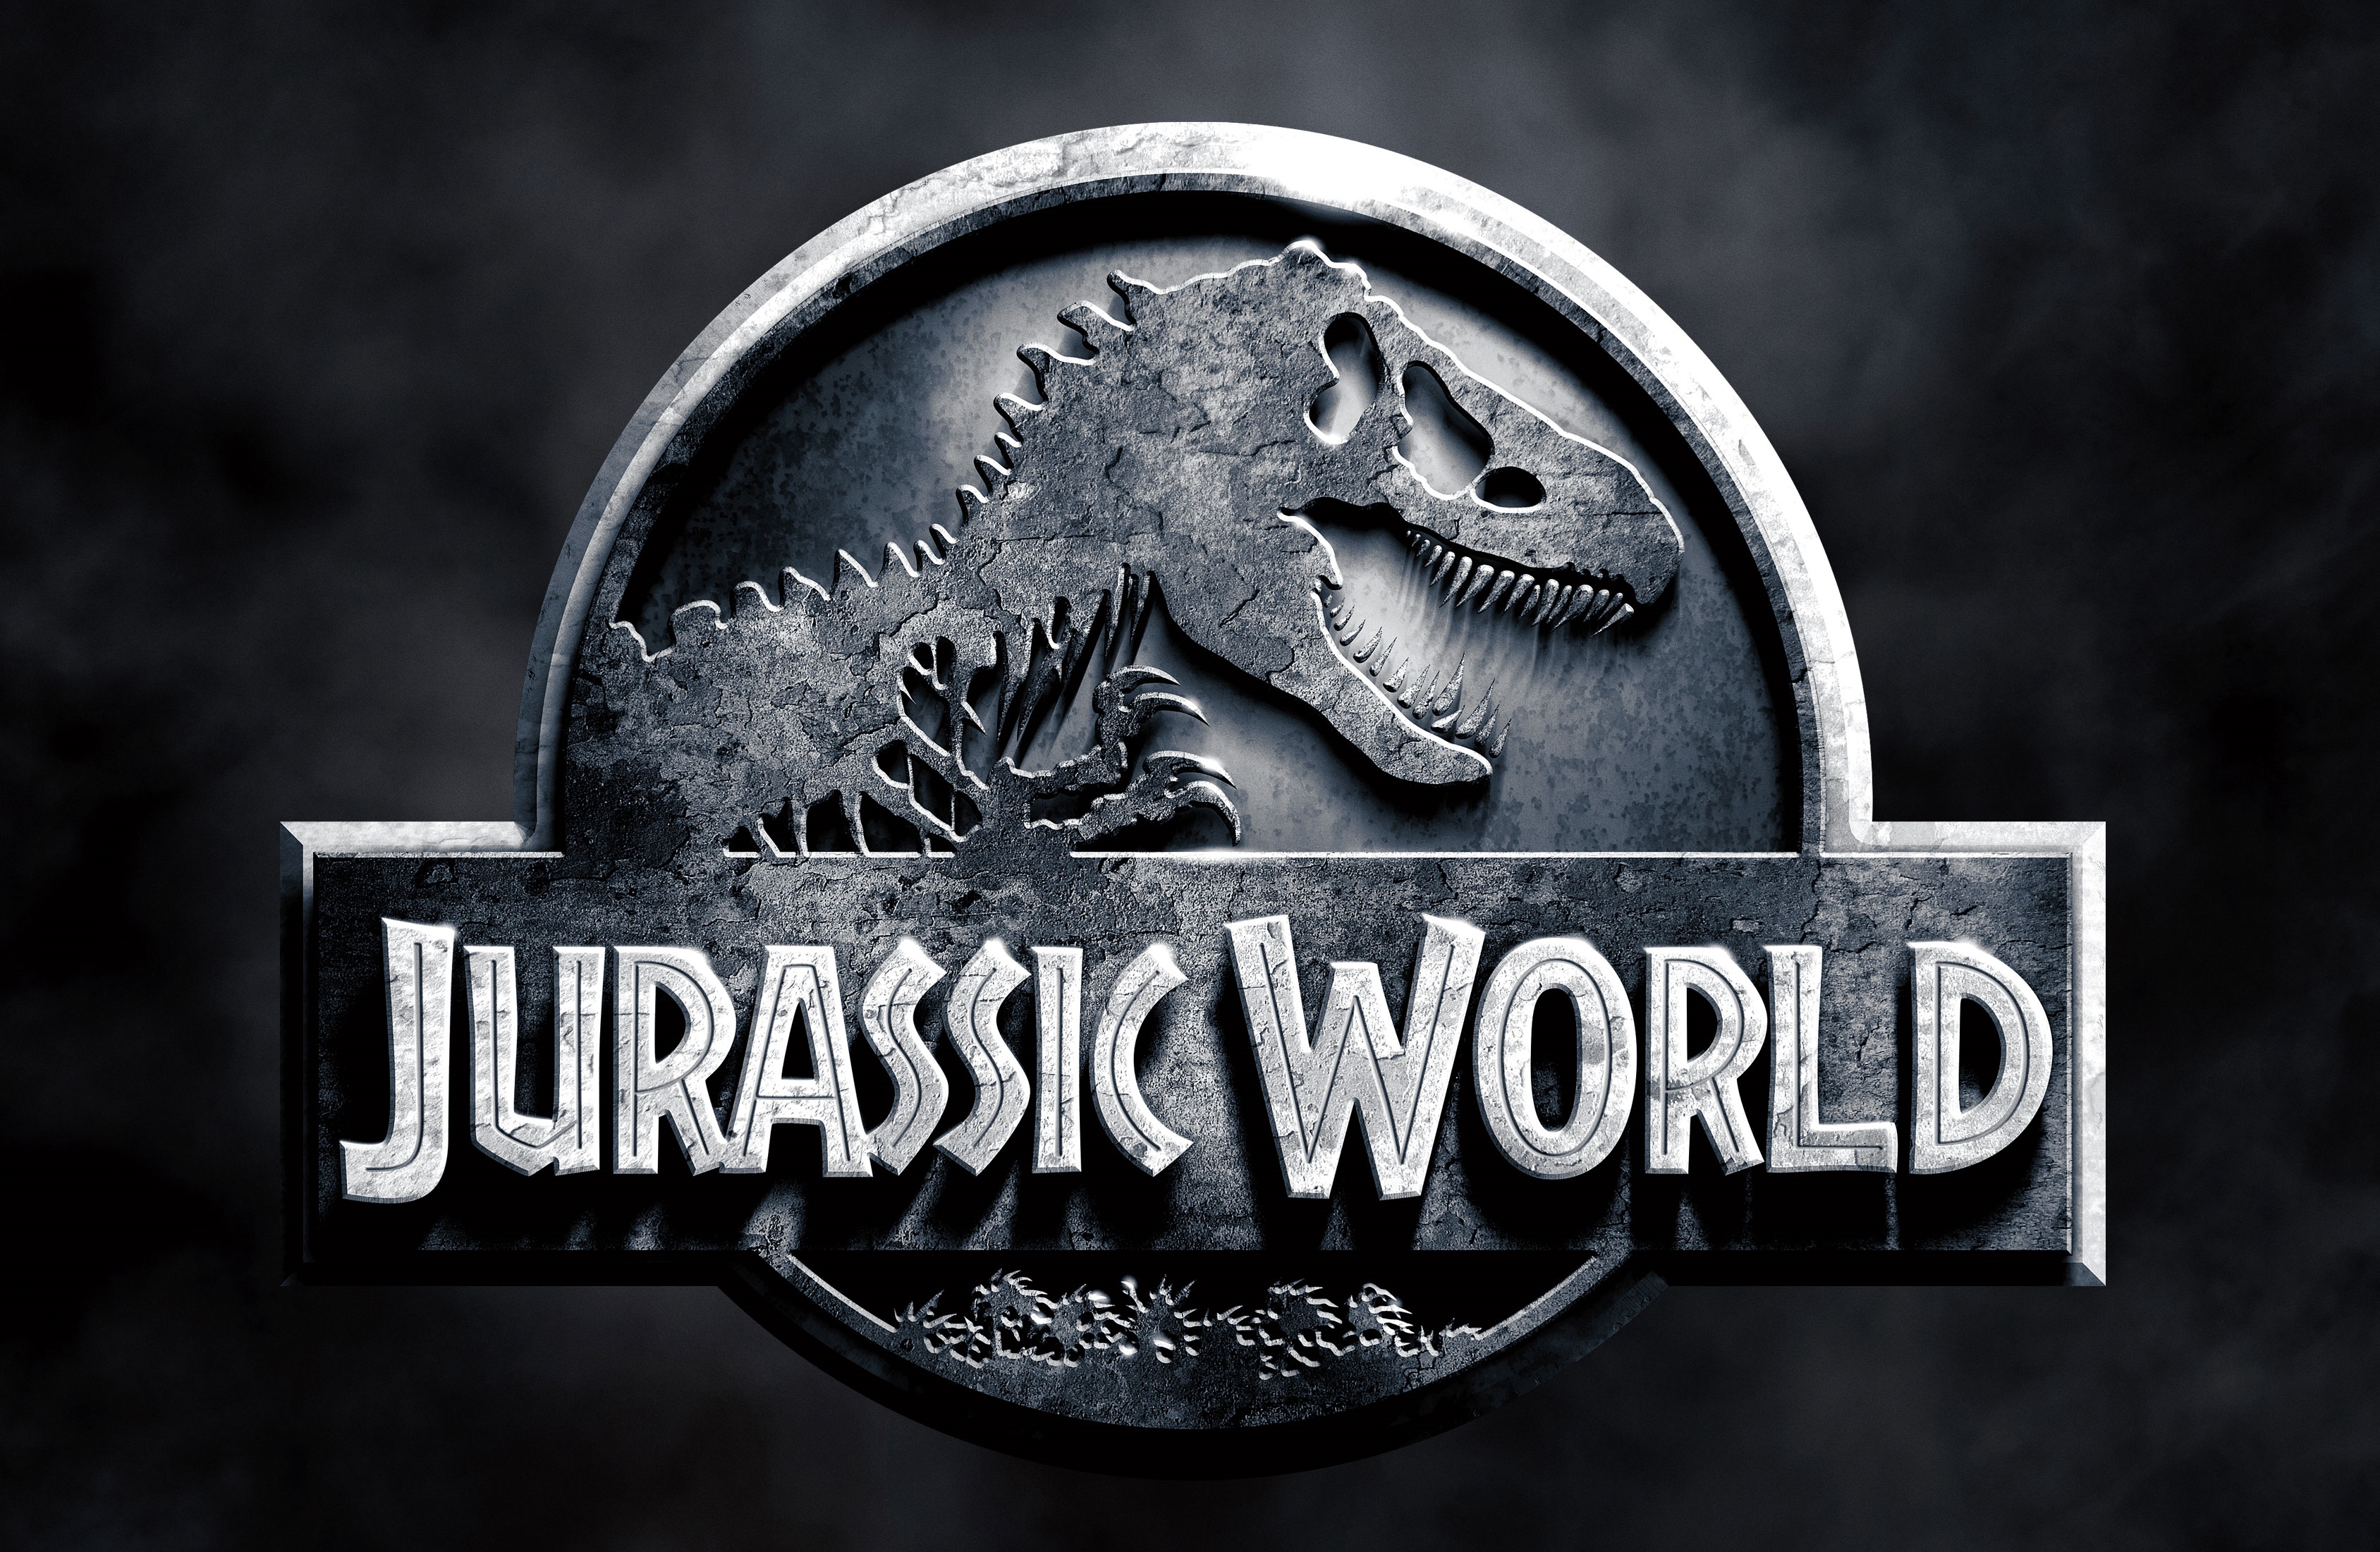 movie review of jurassic world